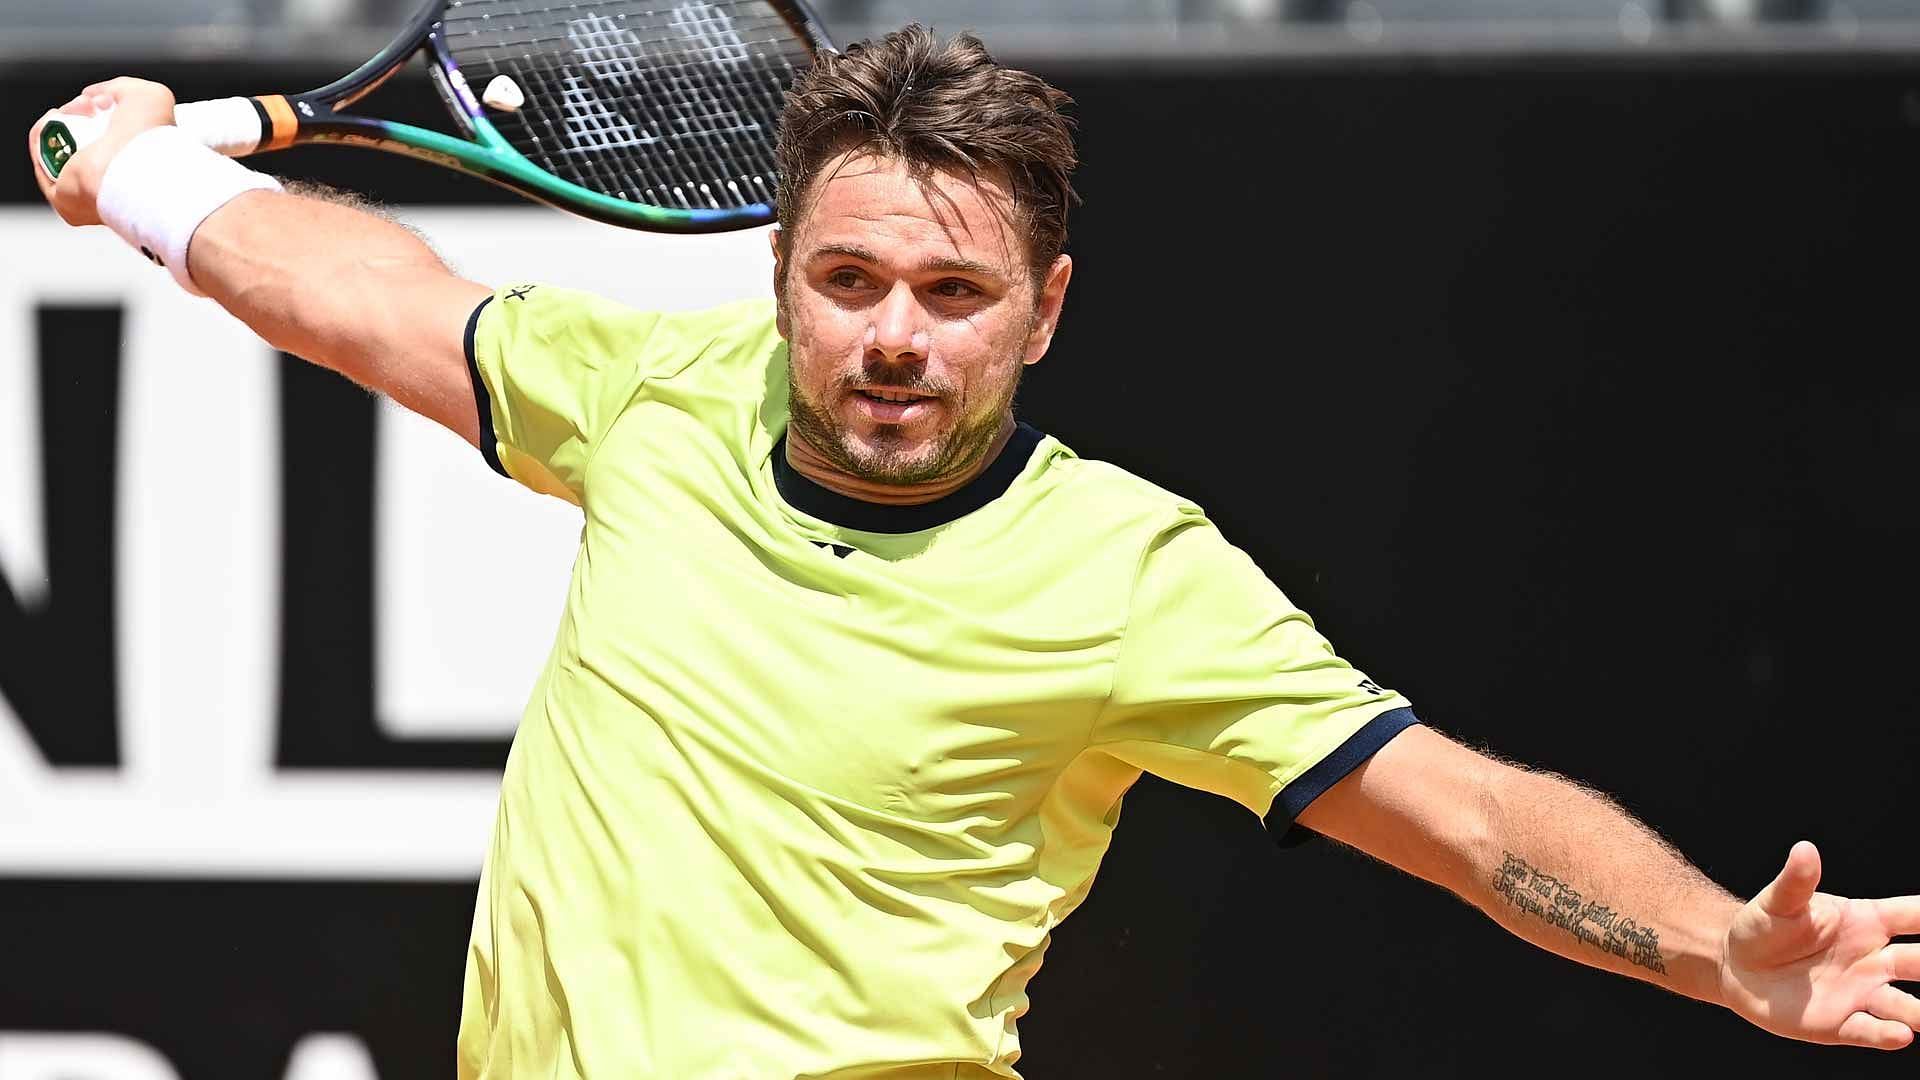 Stan Wawrinka fought back well in the second set